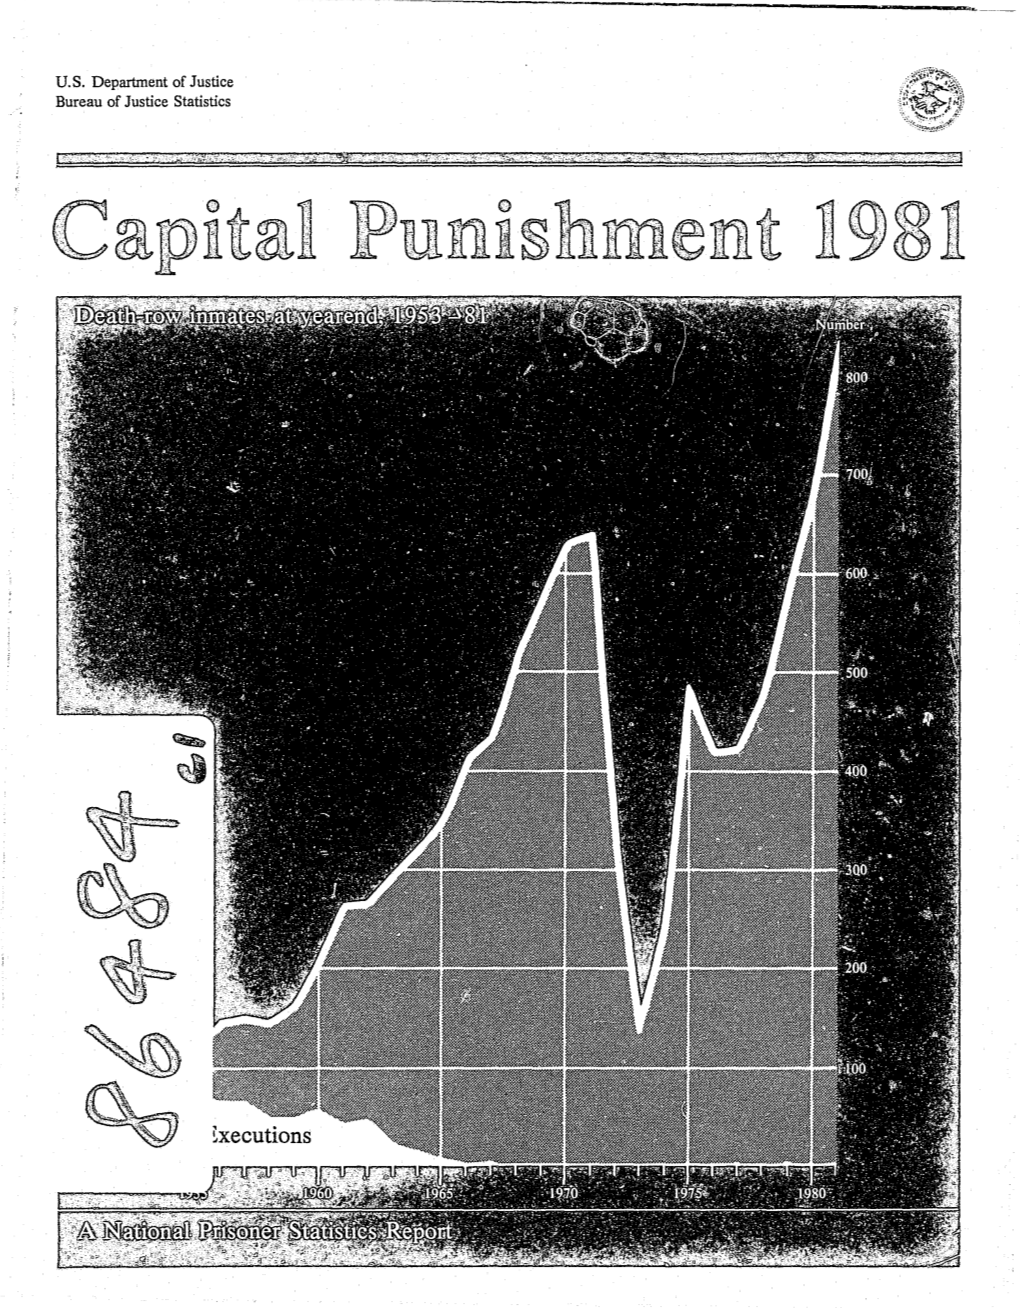 Capital Punishment 1981 (Final Report), Privacy and Security Box 1240, Ann Arbor, Mich.4B106, (313/764-5199)